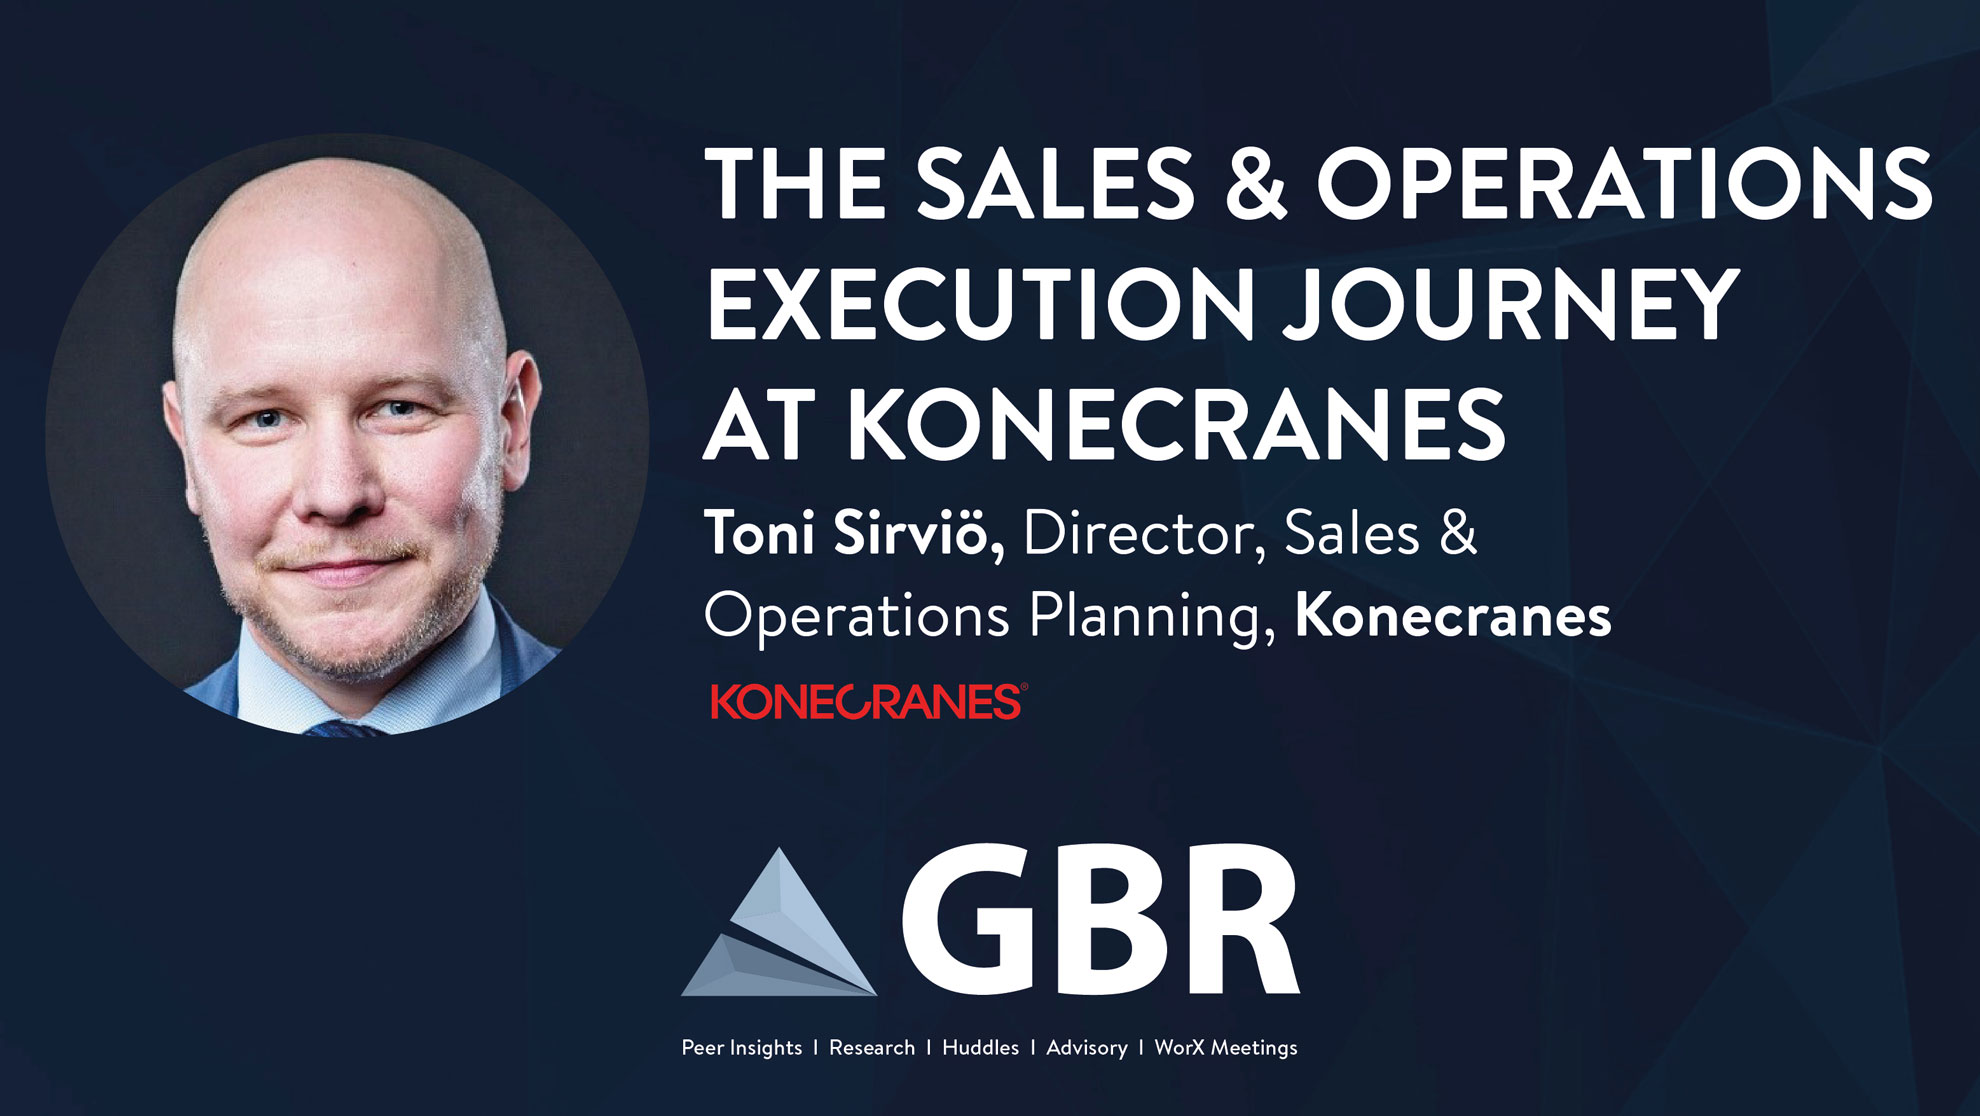 The Sales & Operations Execution Journey at Konecranes